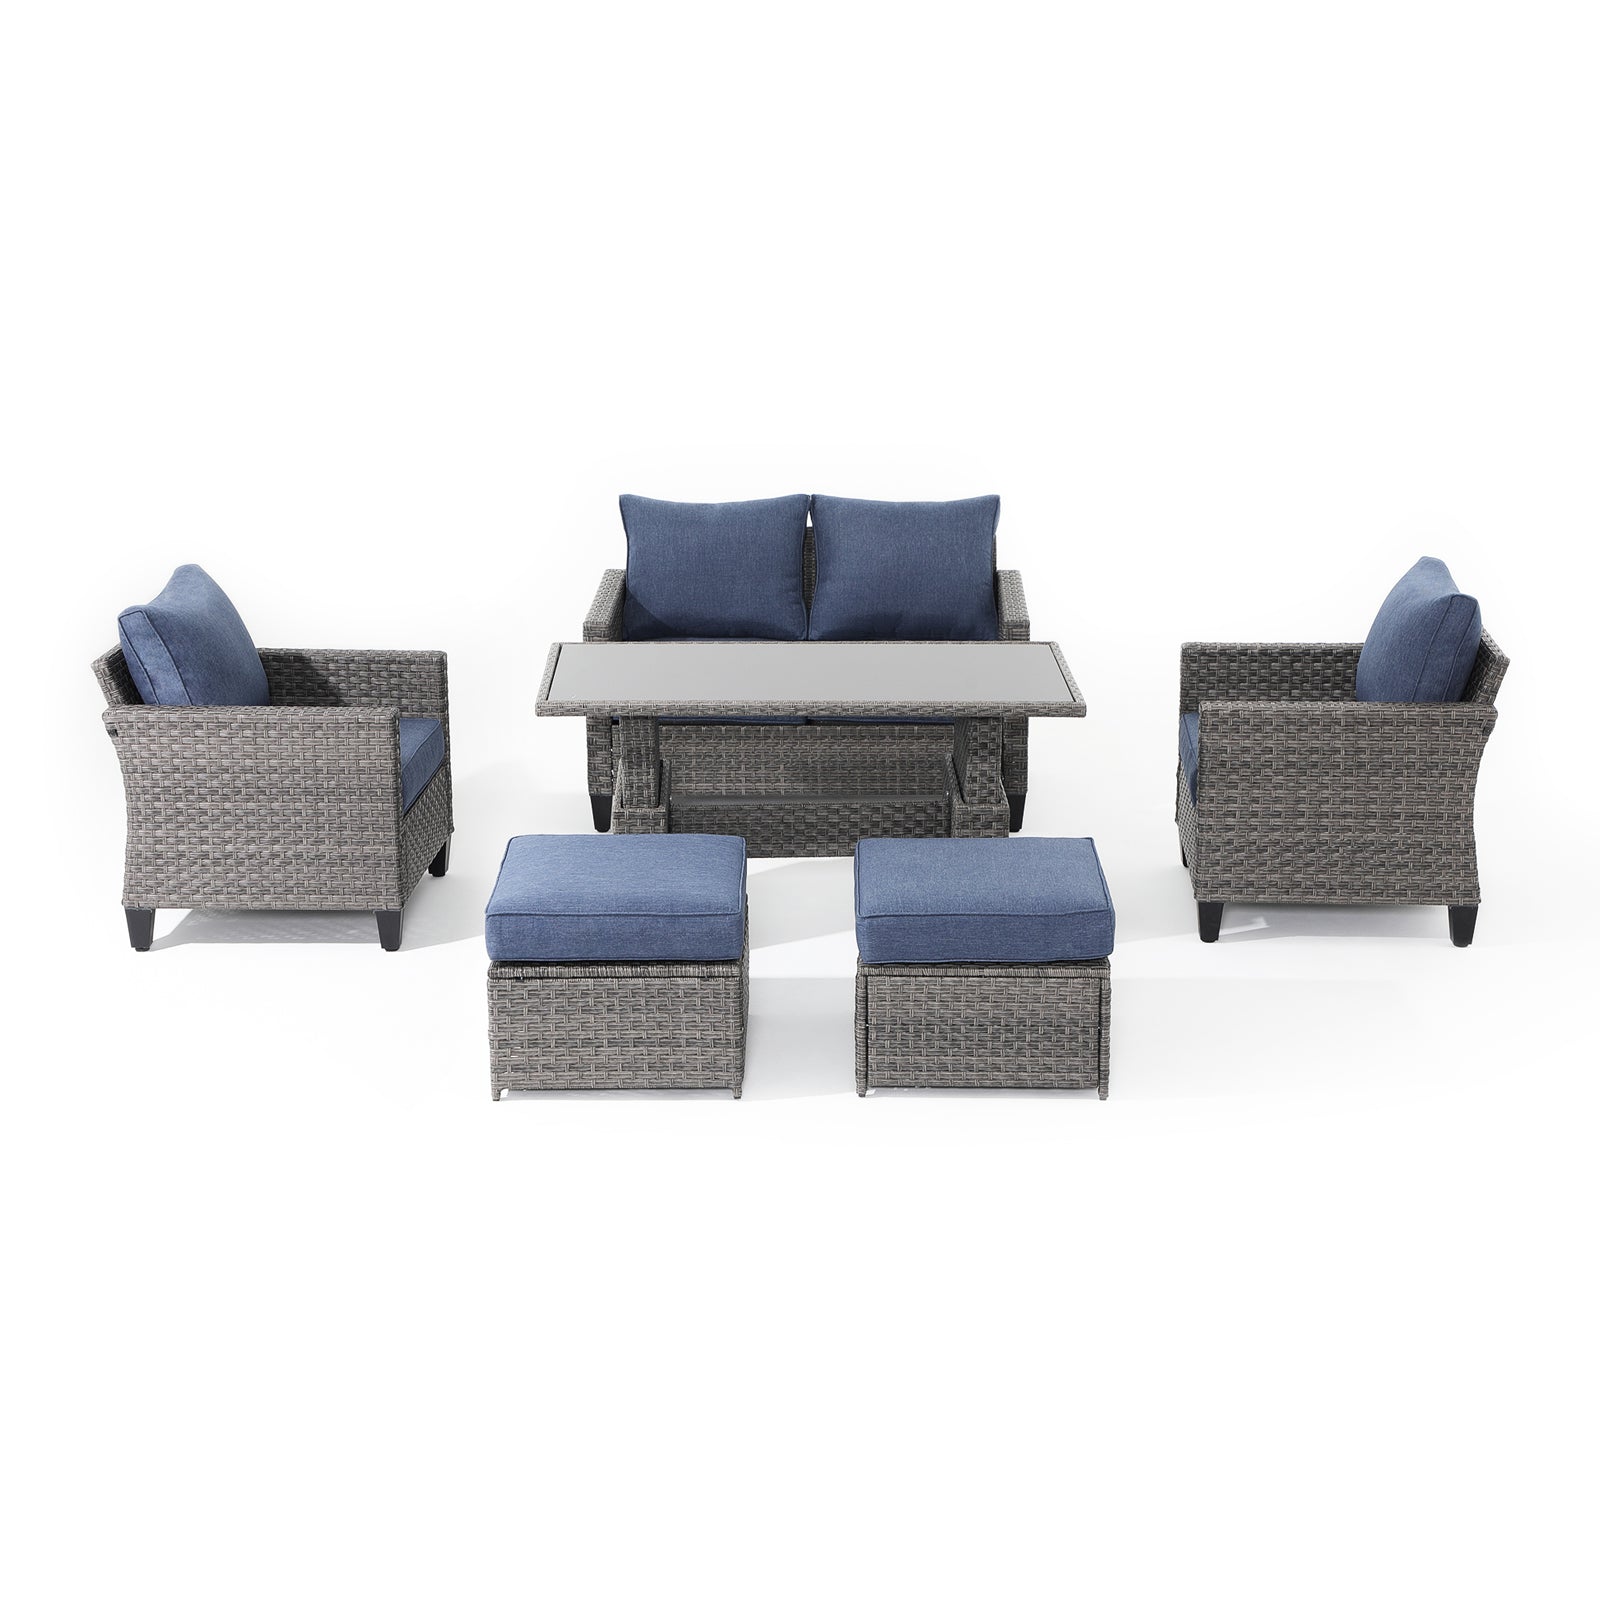 Ayia Modern HDPE Wicker Outdoor Furniture, 6 piece outdoor seating set with blue cushions-Jardina furniture #color_Navy blue#piece_6-pc. with Ottomans